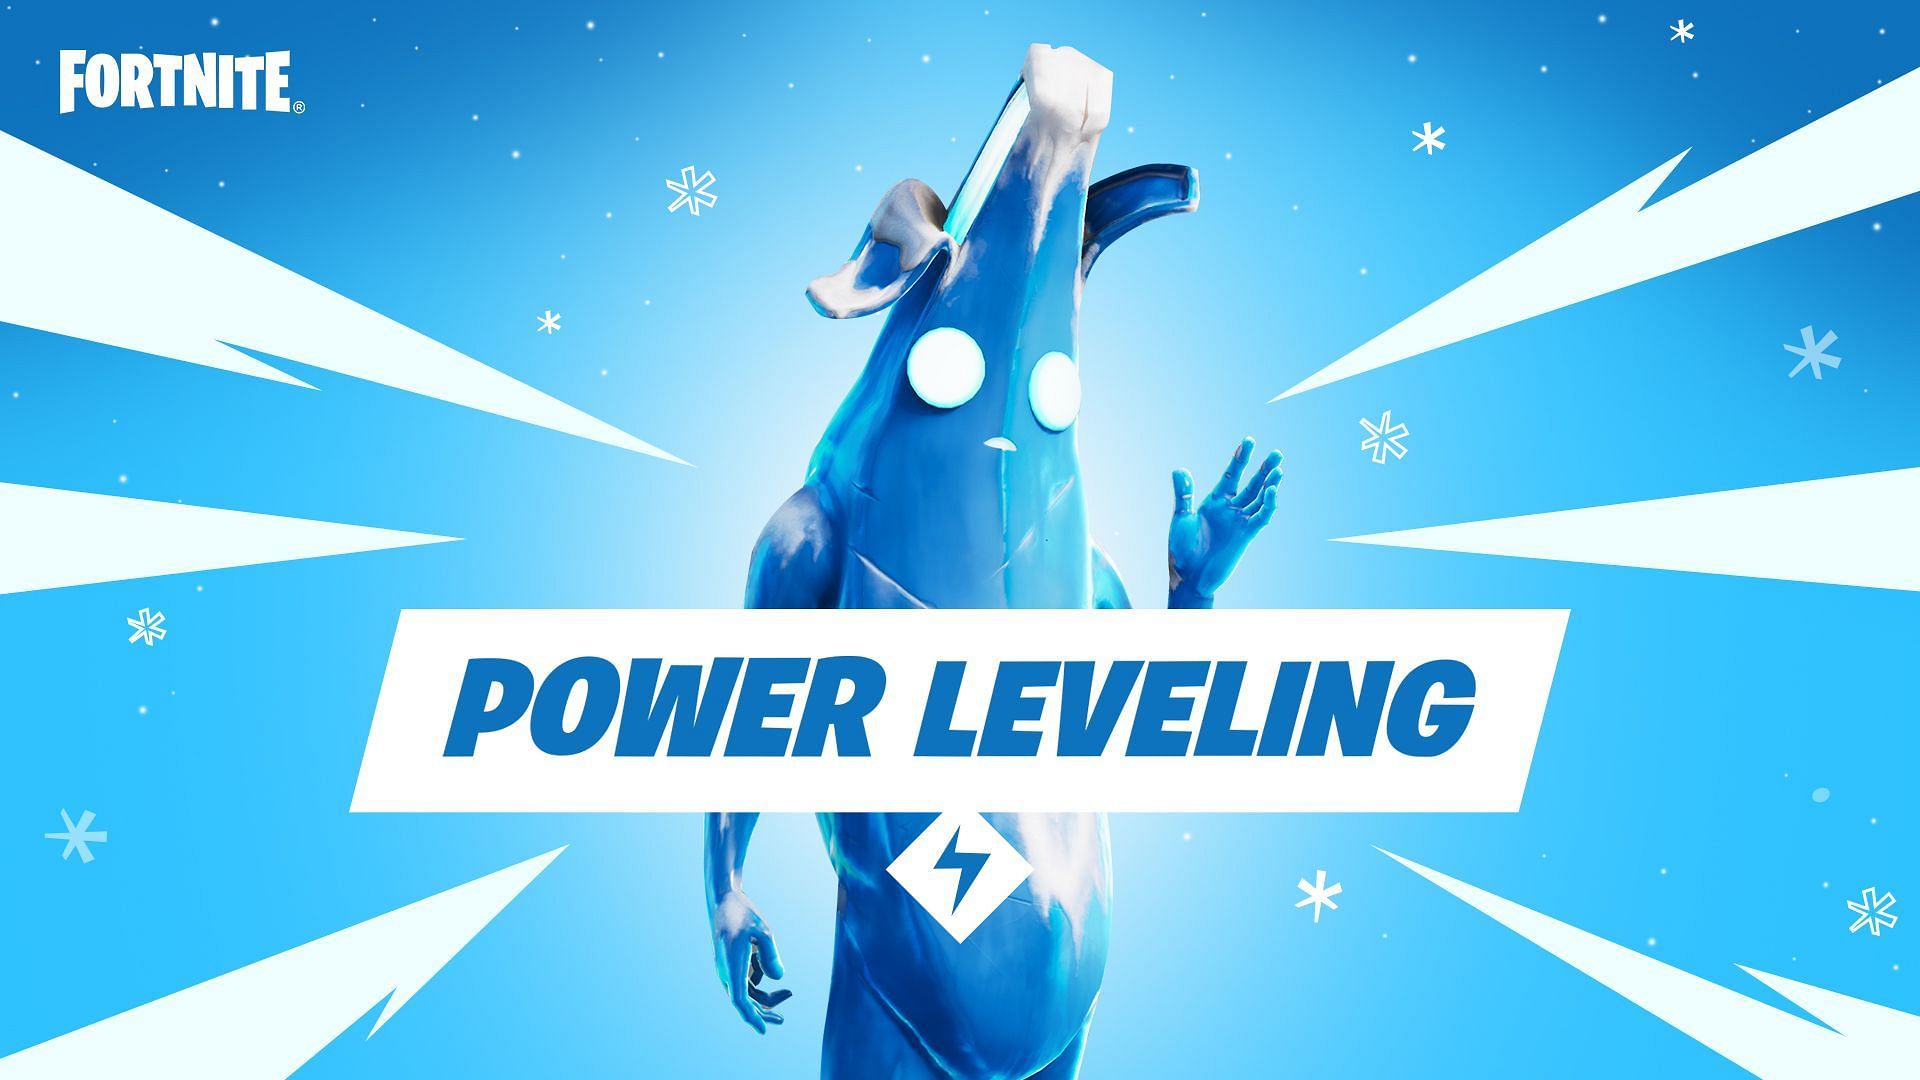 Gamers will get the Power Leveling Weekend in Fortnite Chapter 3 Season 1 (Image via Fortnite)